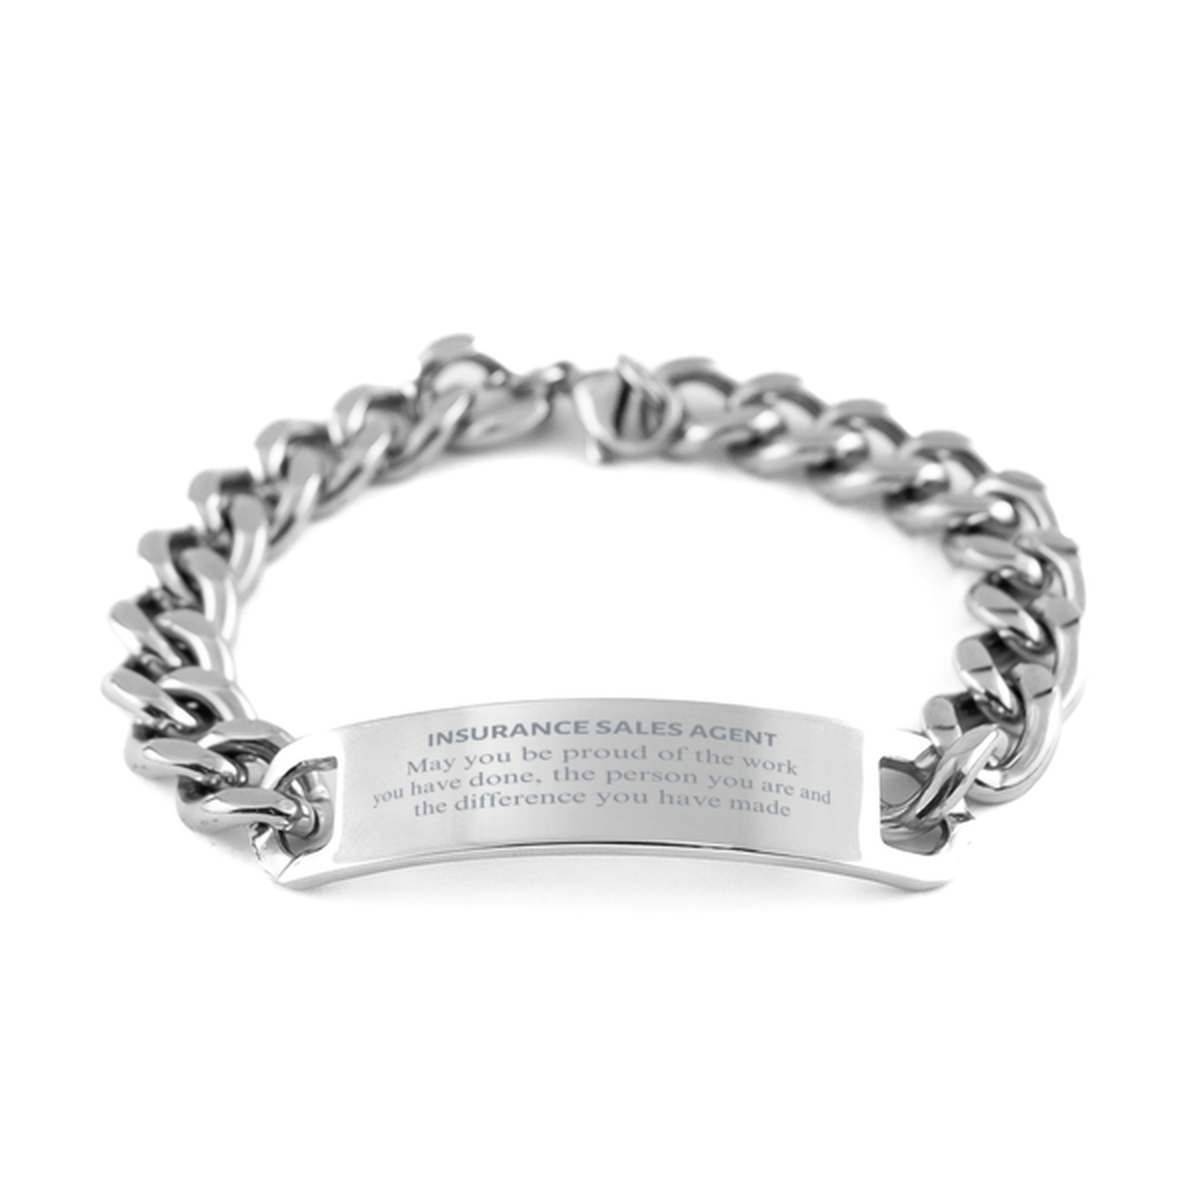 Insurance Sales Agent May you be proud of the work you have done, Retirement Insurance Sales Agent Cuban Chain Stainless Steel Bracelet for Colleague Appreciation Gifts Amazing for Insurance Sales Agent